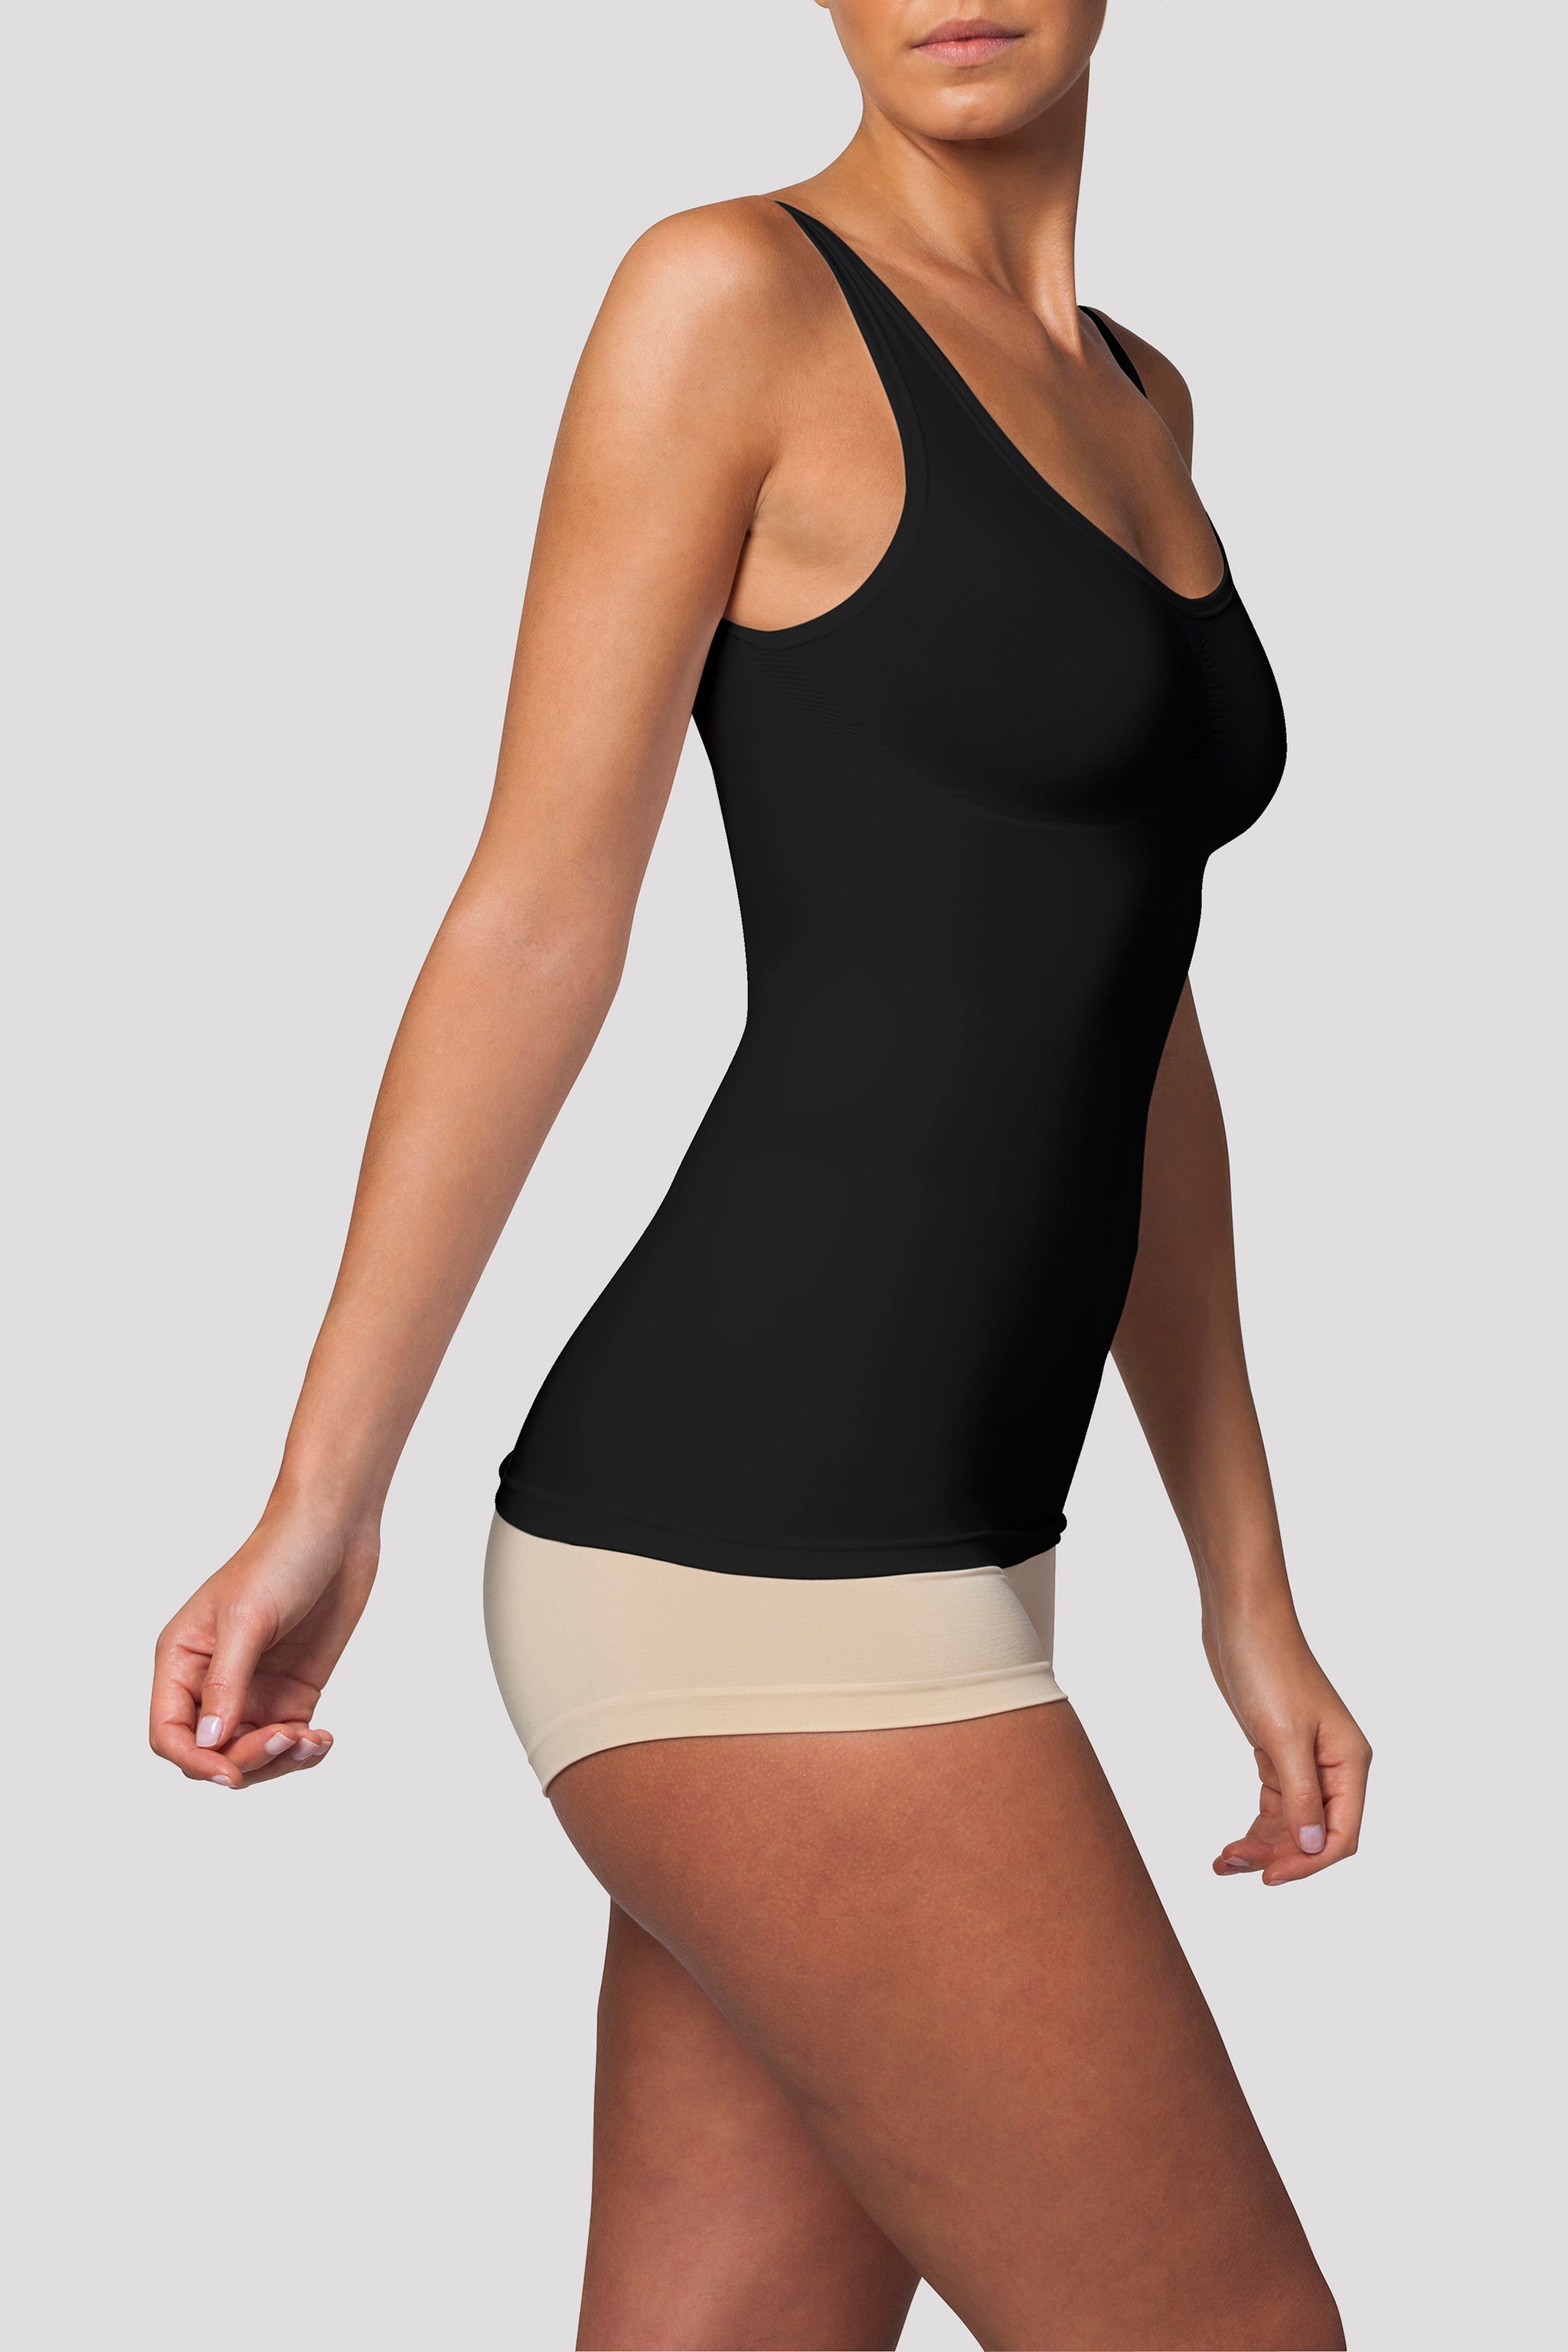 shapewear top with straps and tummy control - Black